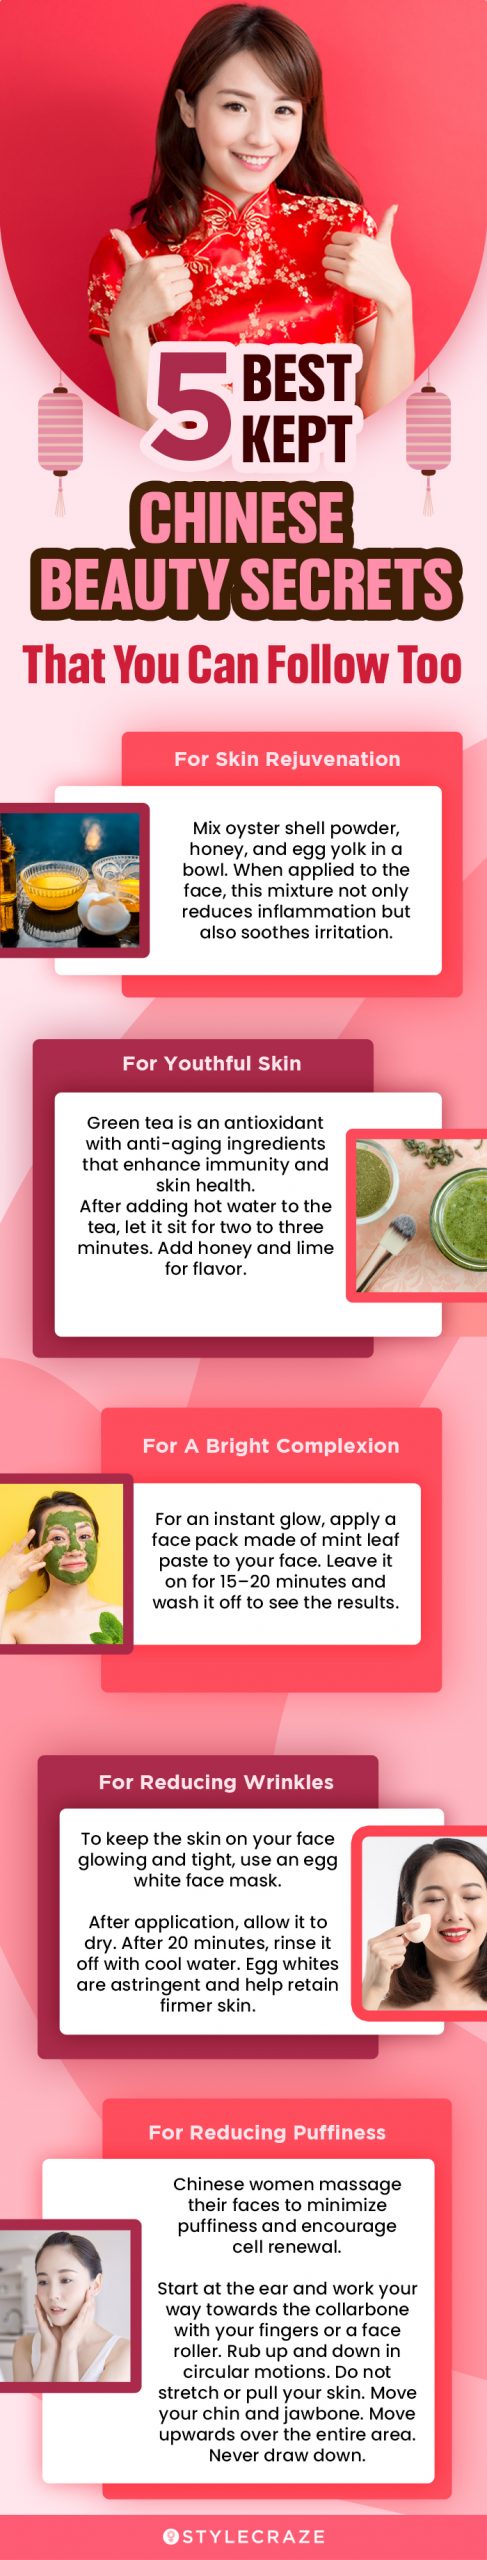 5 best kept chinese beauty secrets that you can follow too (infographic)